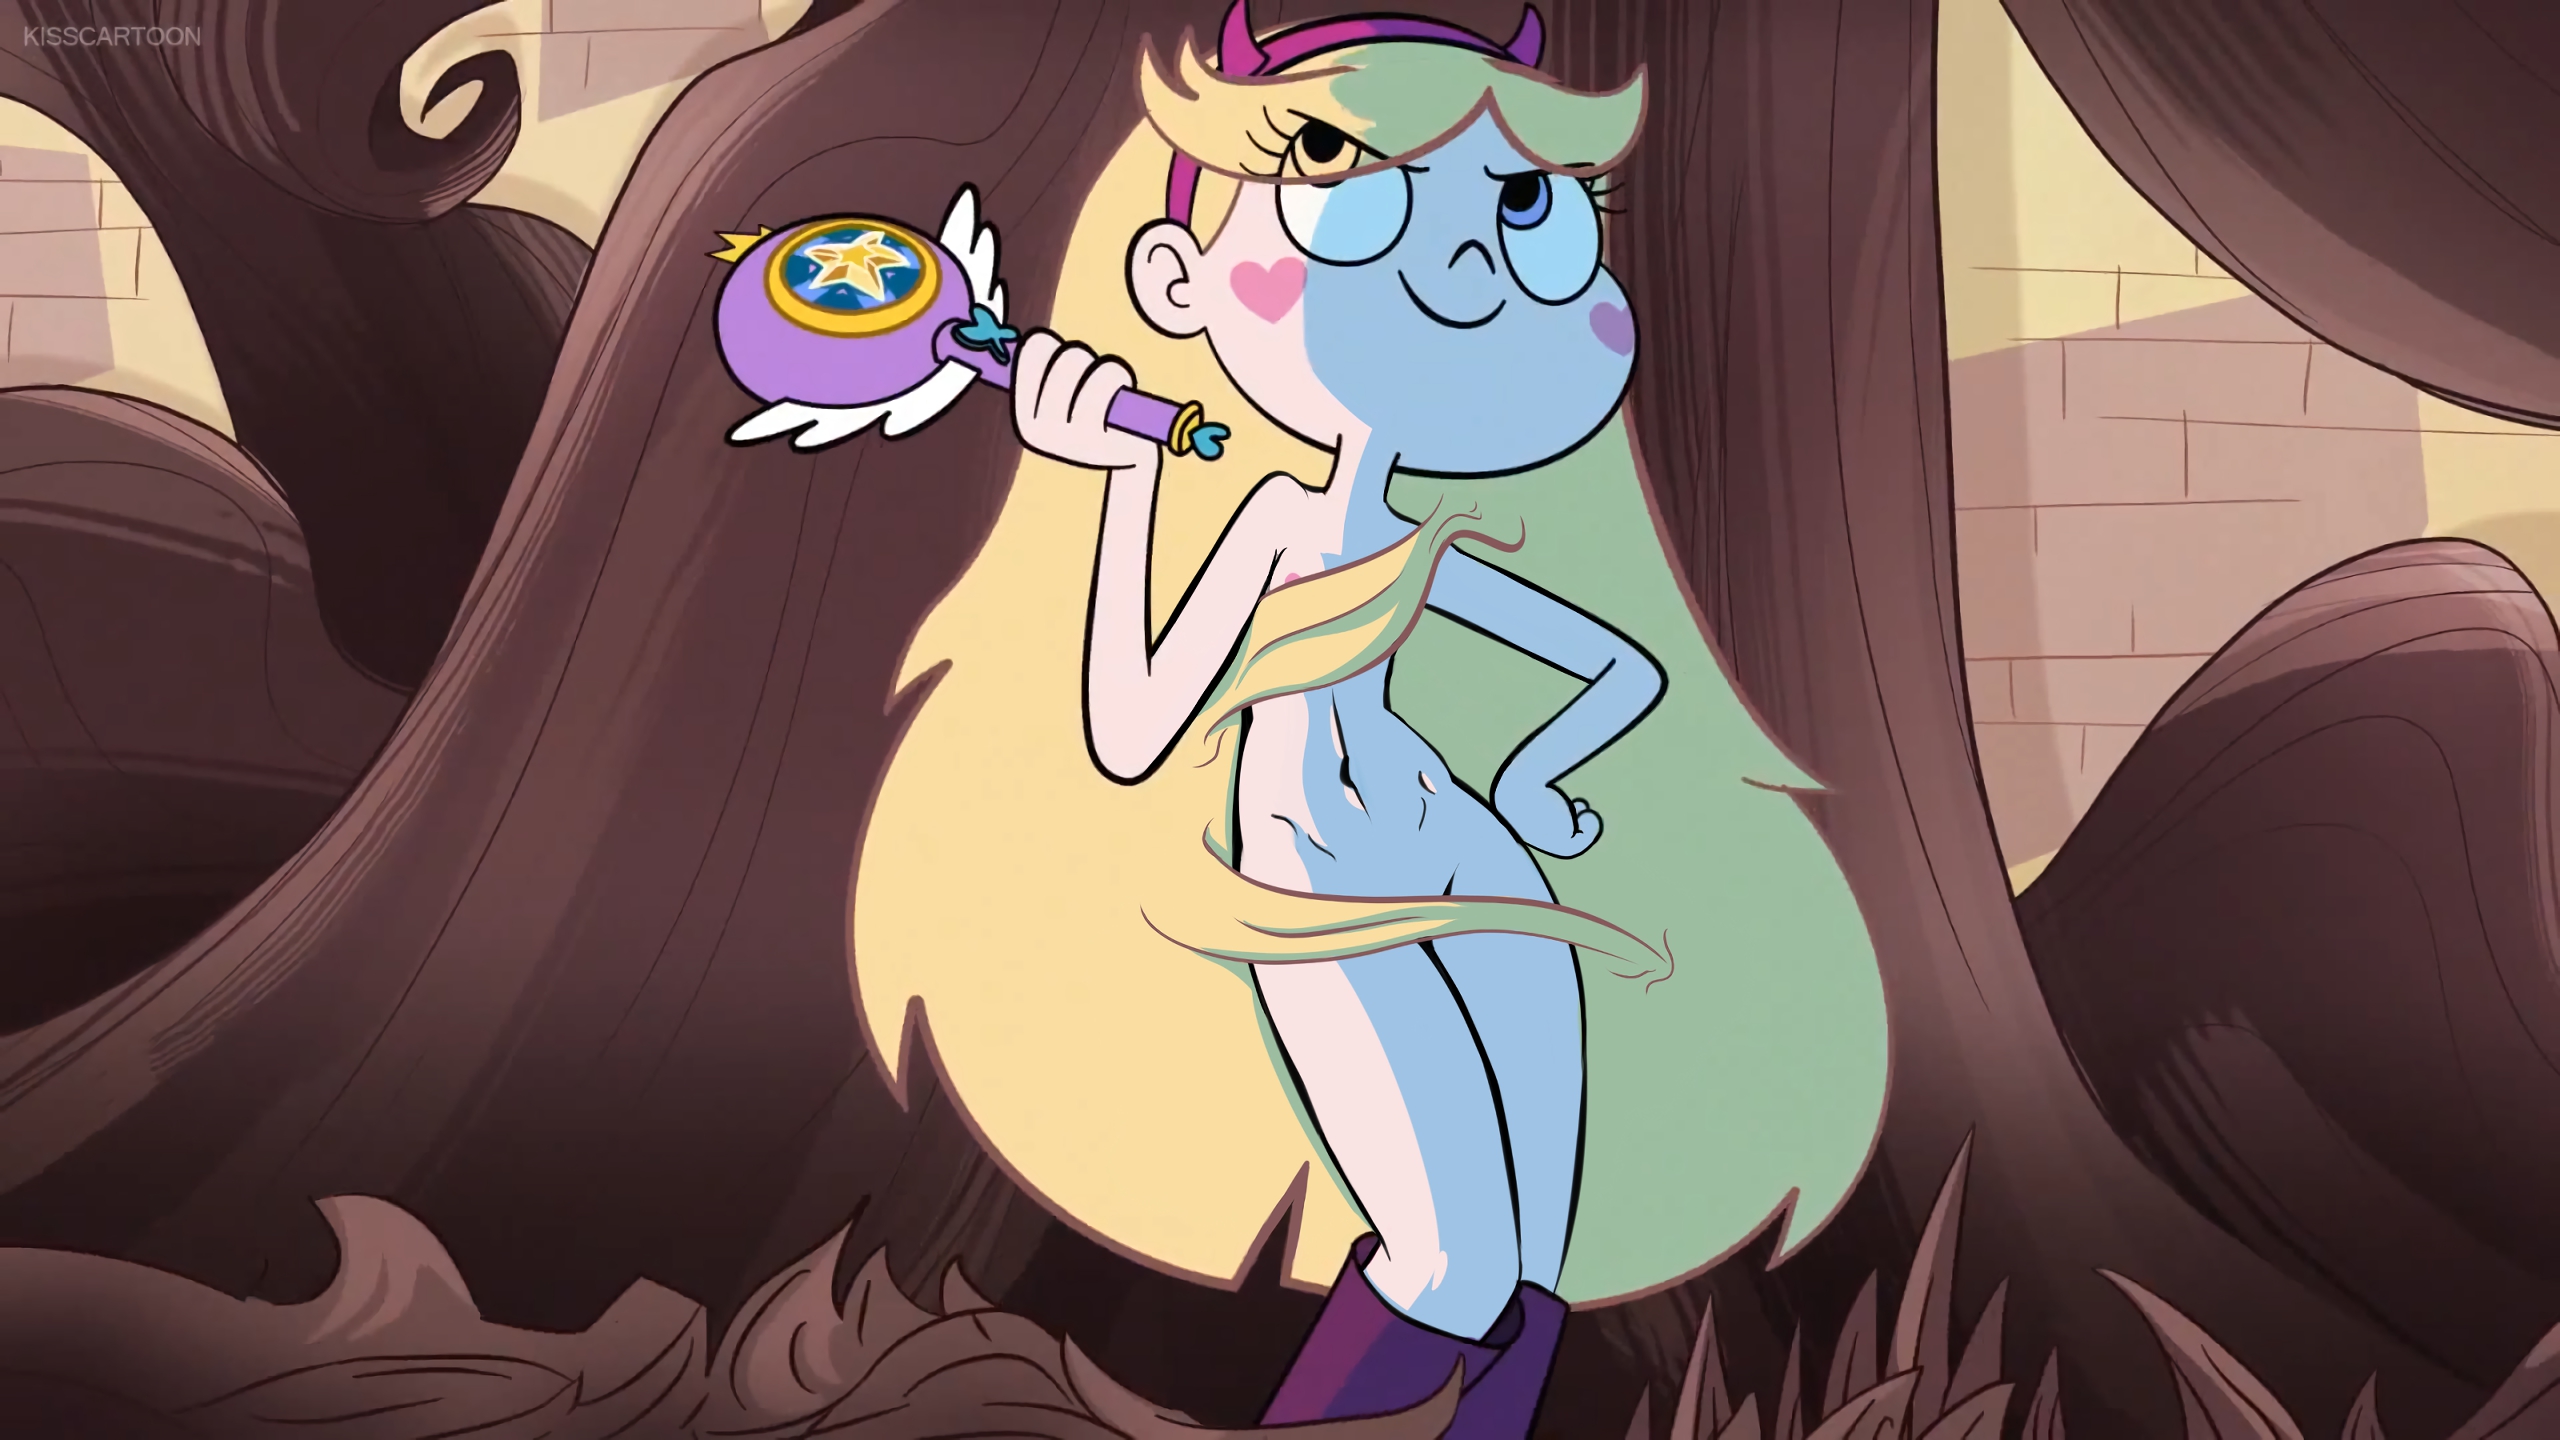 2255530_-_star_butterfly_star_vs_the_forces_of_evil_edit